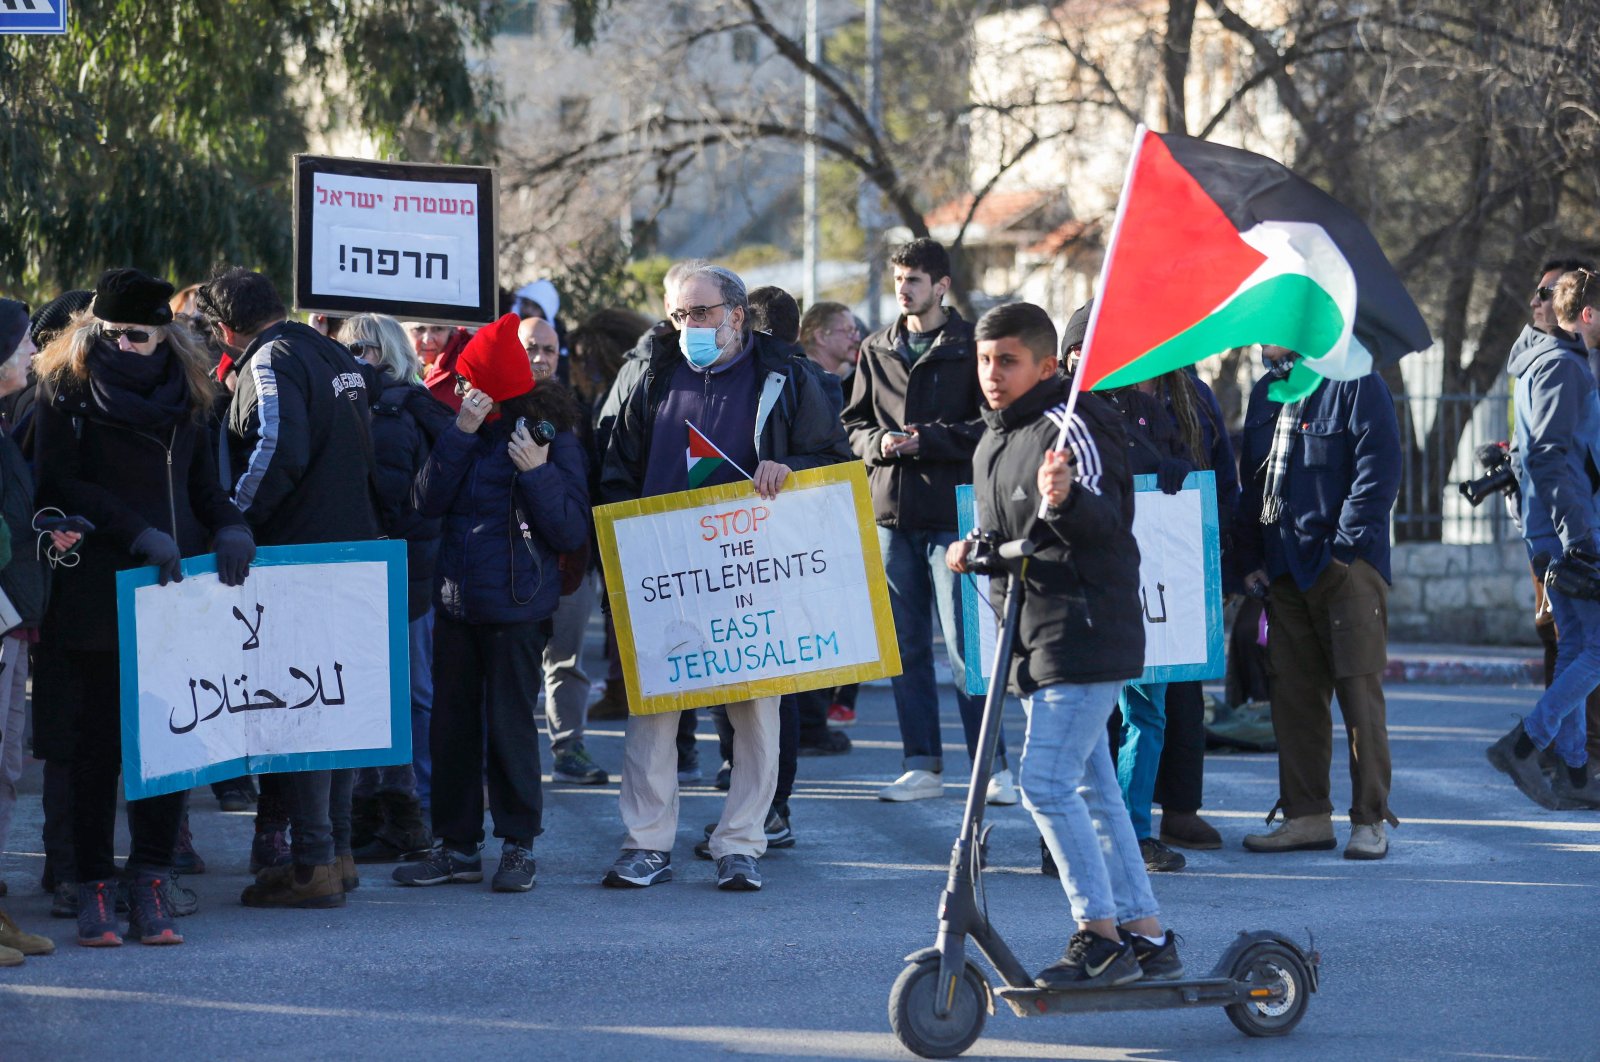 Palestinian, Israeli and foreign activists protest in the East Jerusalem neighborhood Sheikh Jarrah, occupied Palestine, Jan. 21, 2022. (AFP Photo)